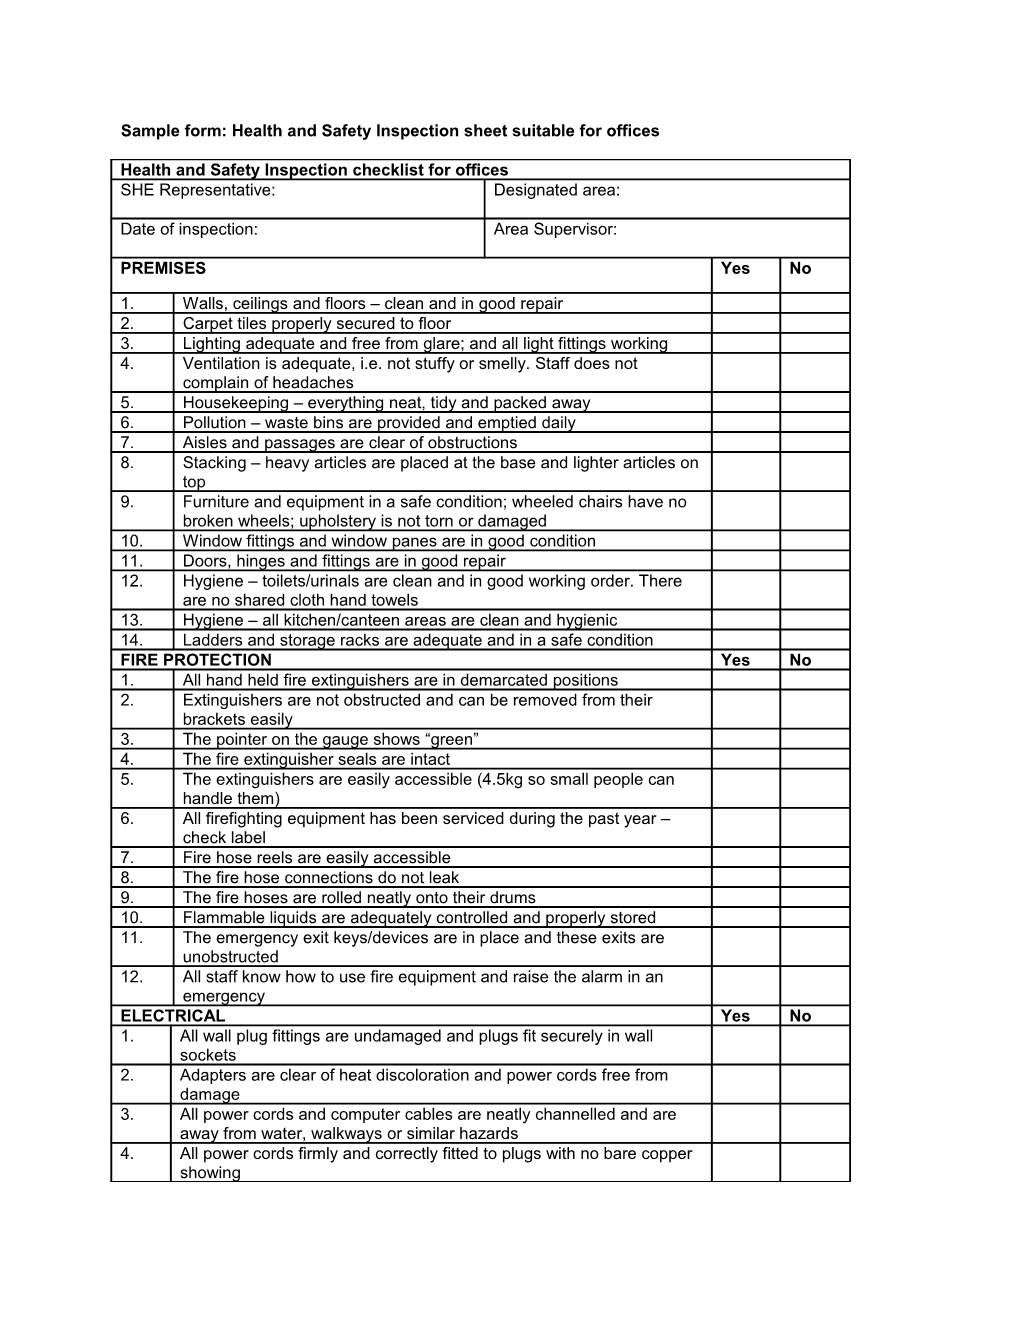 Sample Form: Health and Safety Inspection Sheet Suitable for Offices